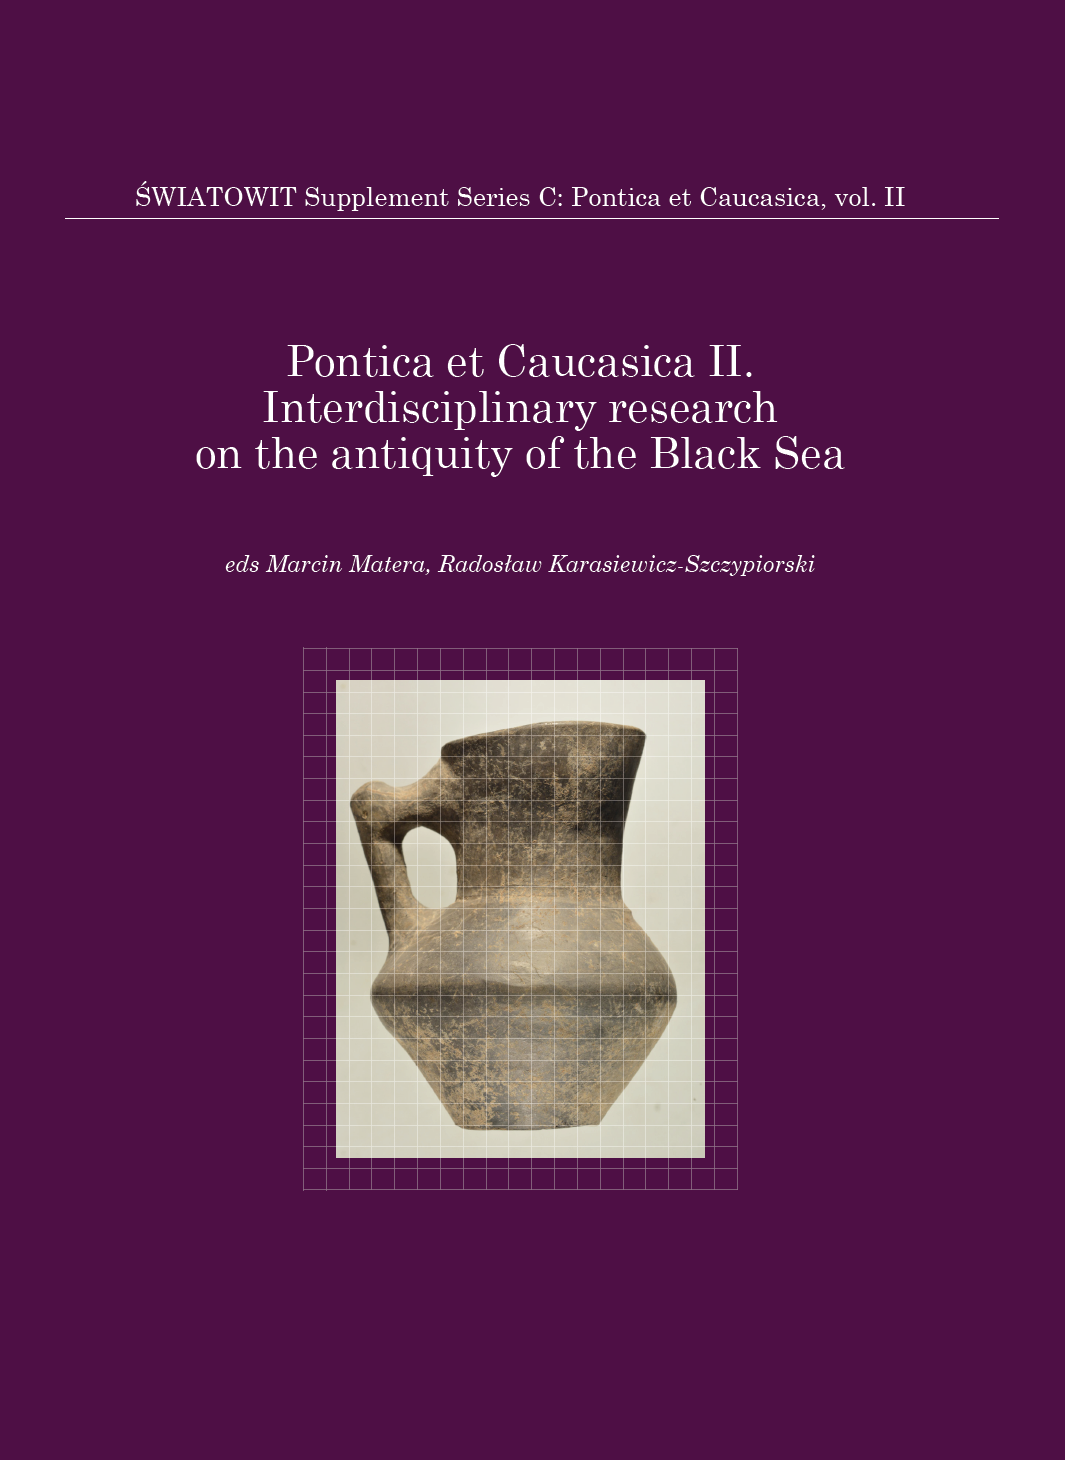 On the Issue of Cretan Wine Import in the Black Sea Region (1st – 2nd centuries AD) Cover Image